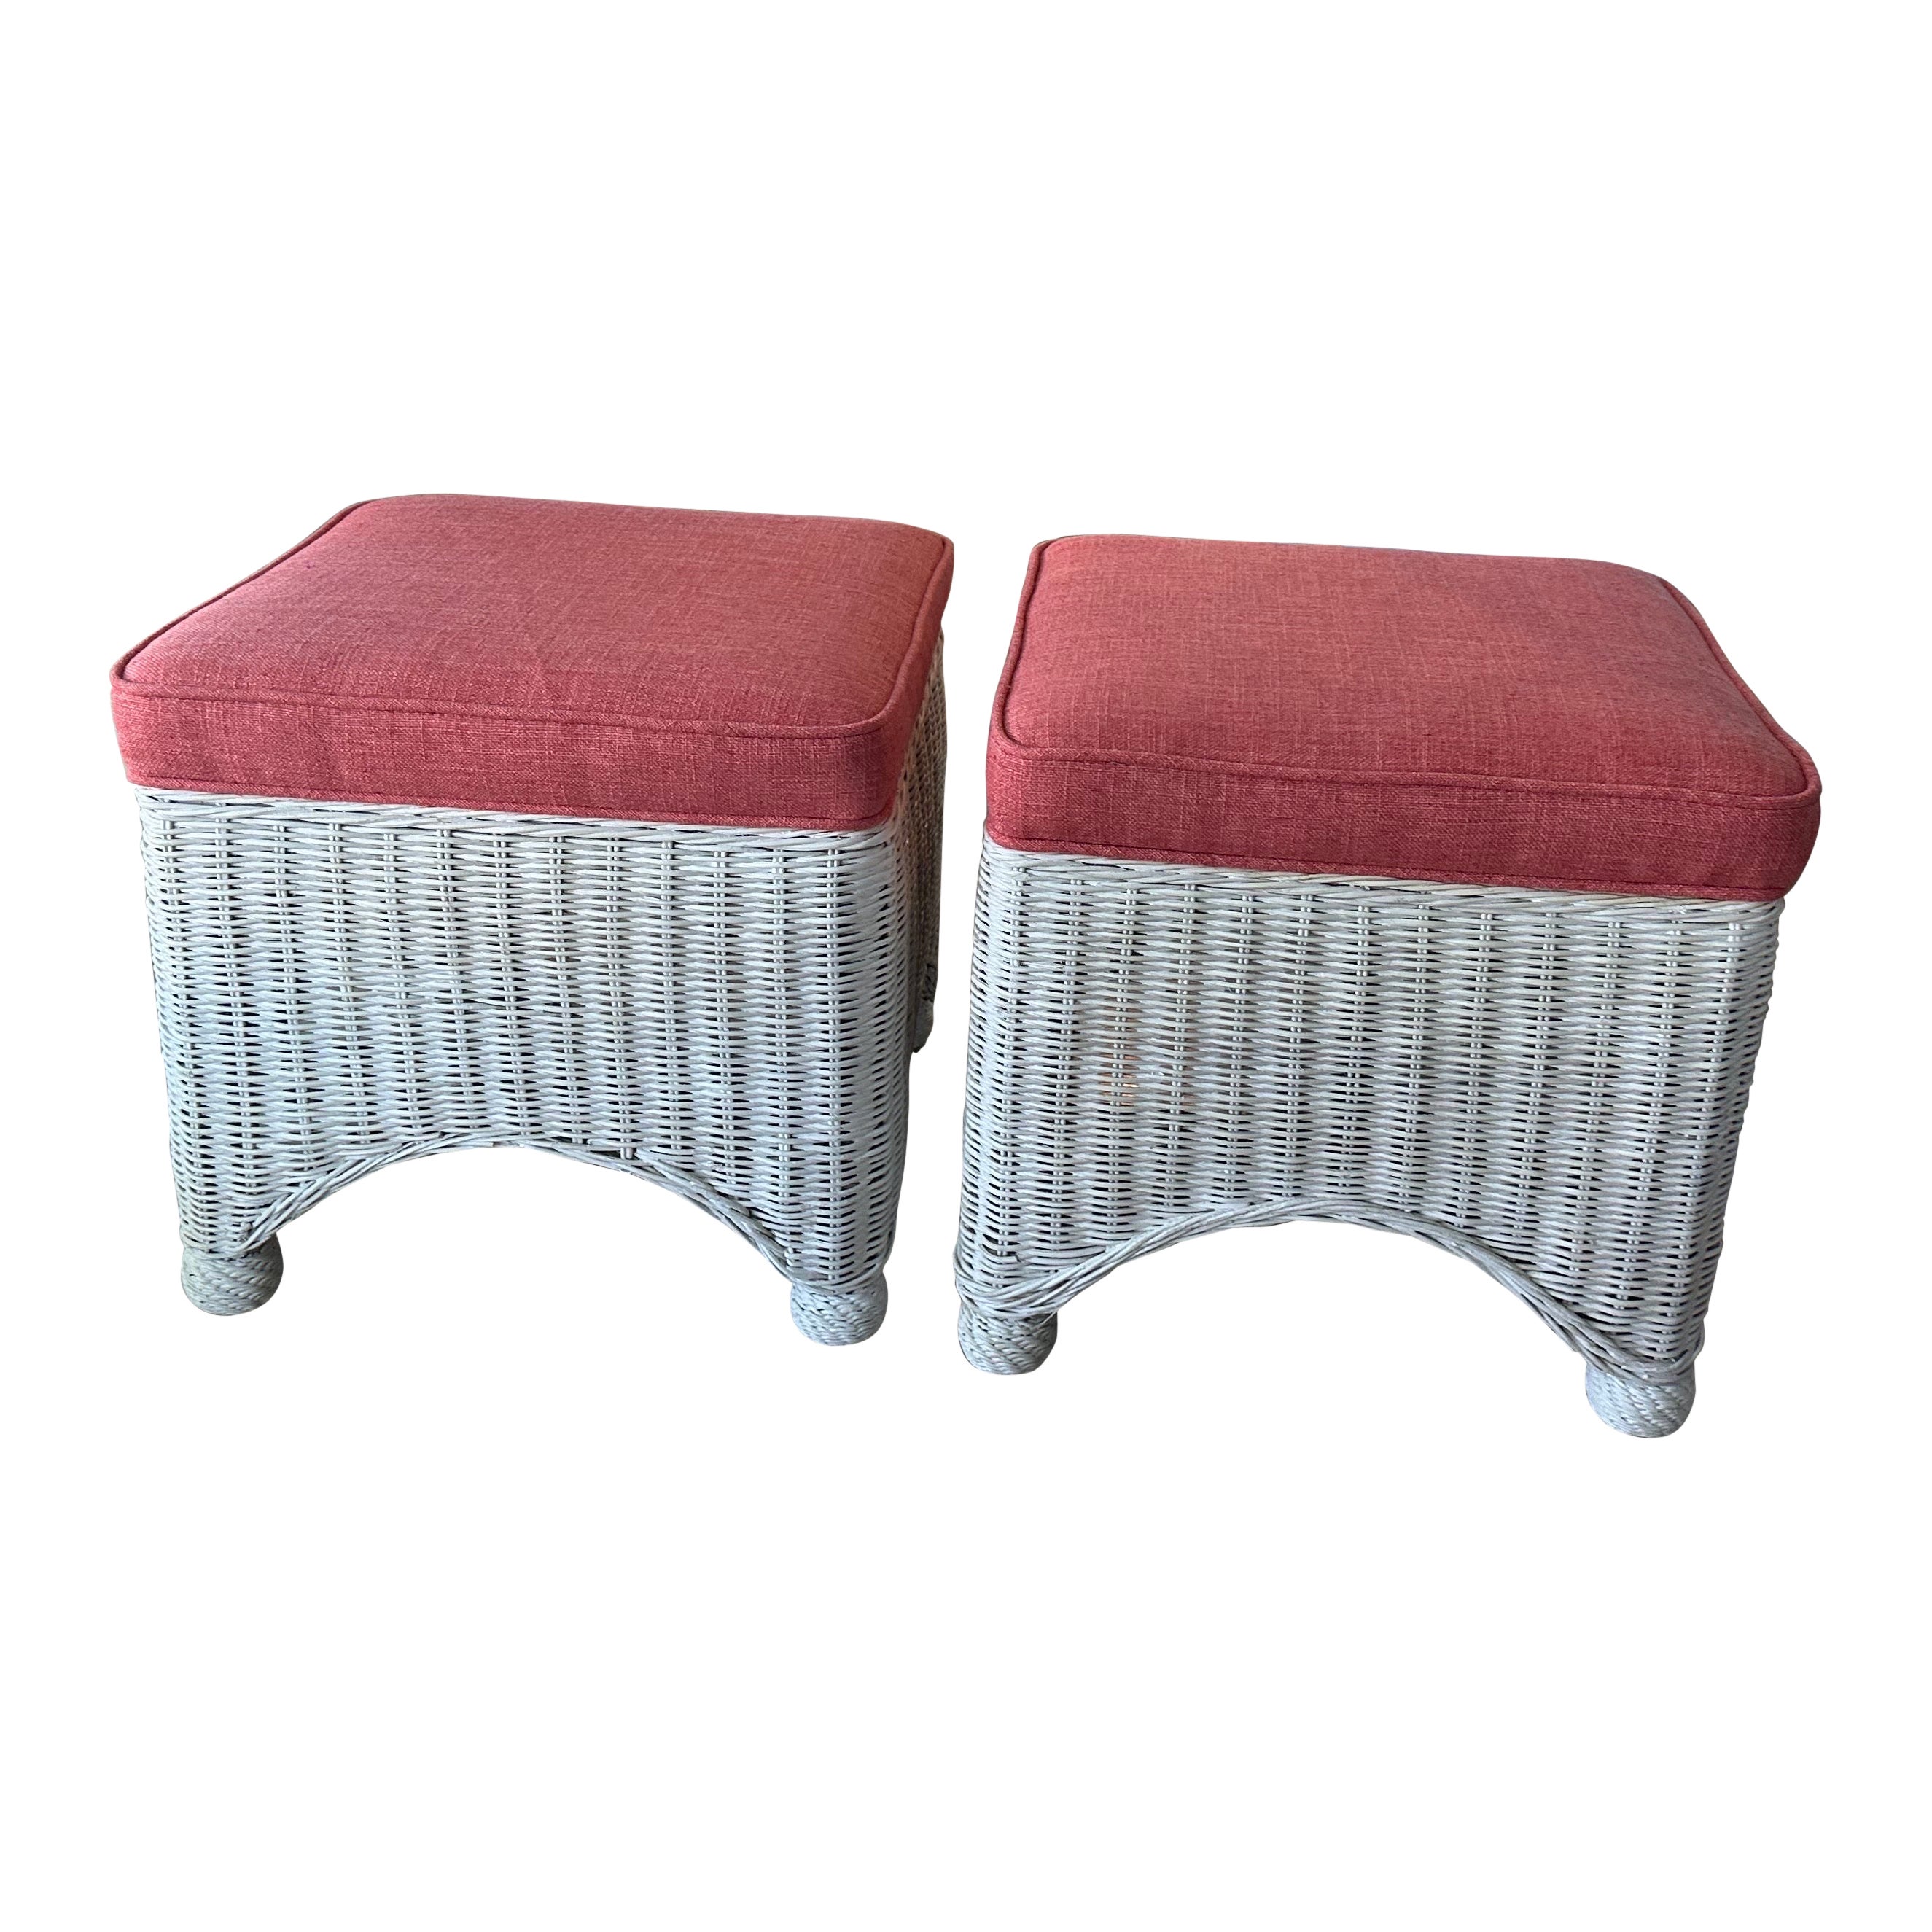 Vintage Pair White Wicker Stools Benches Ottomans New Coral Upholstery